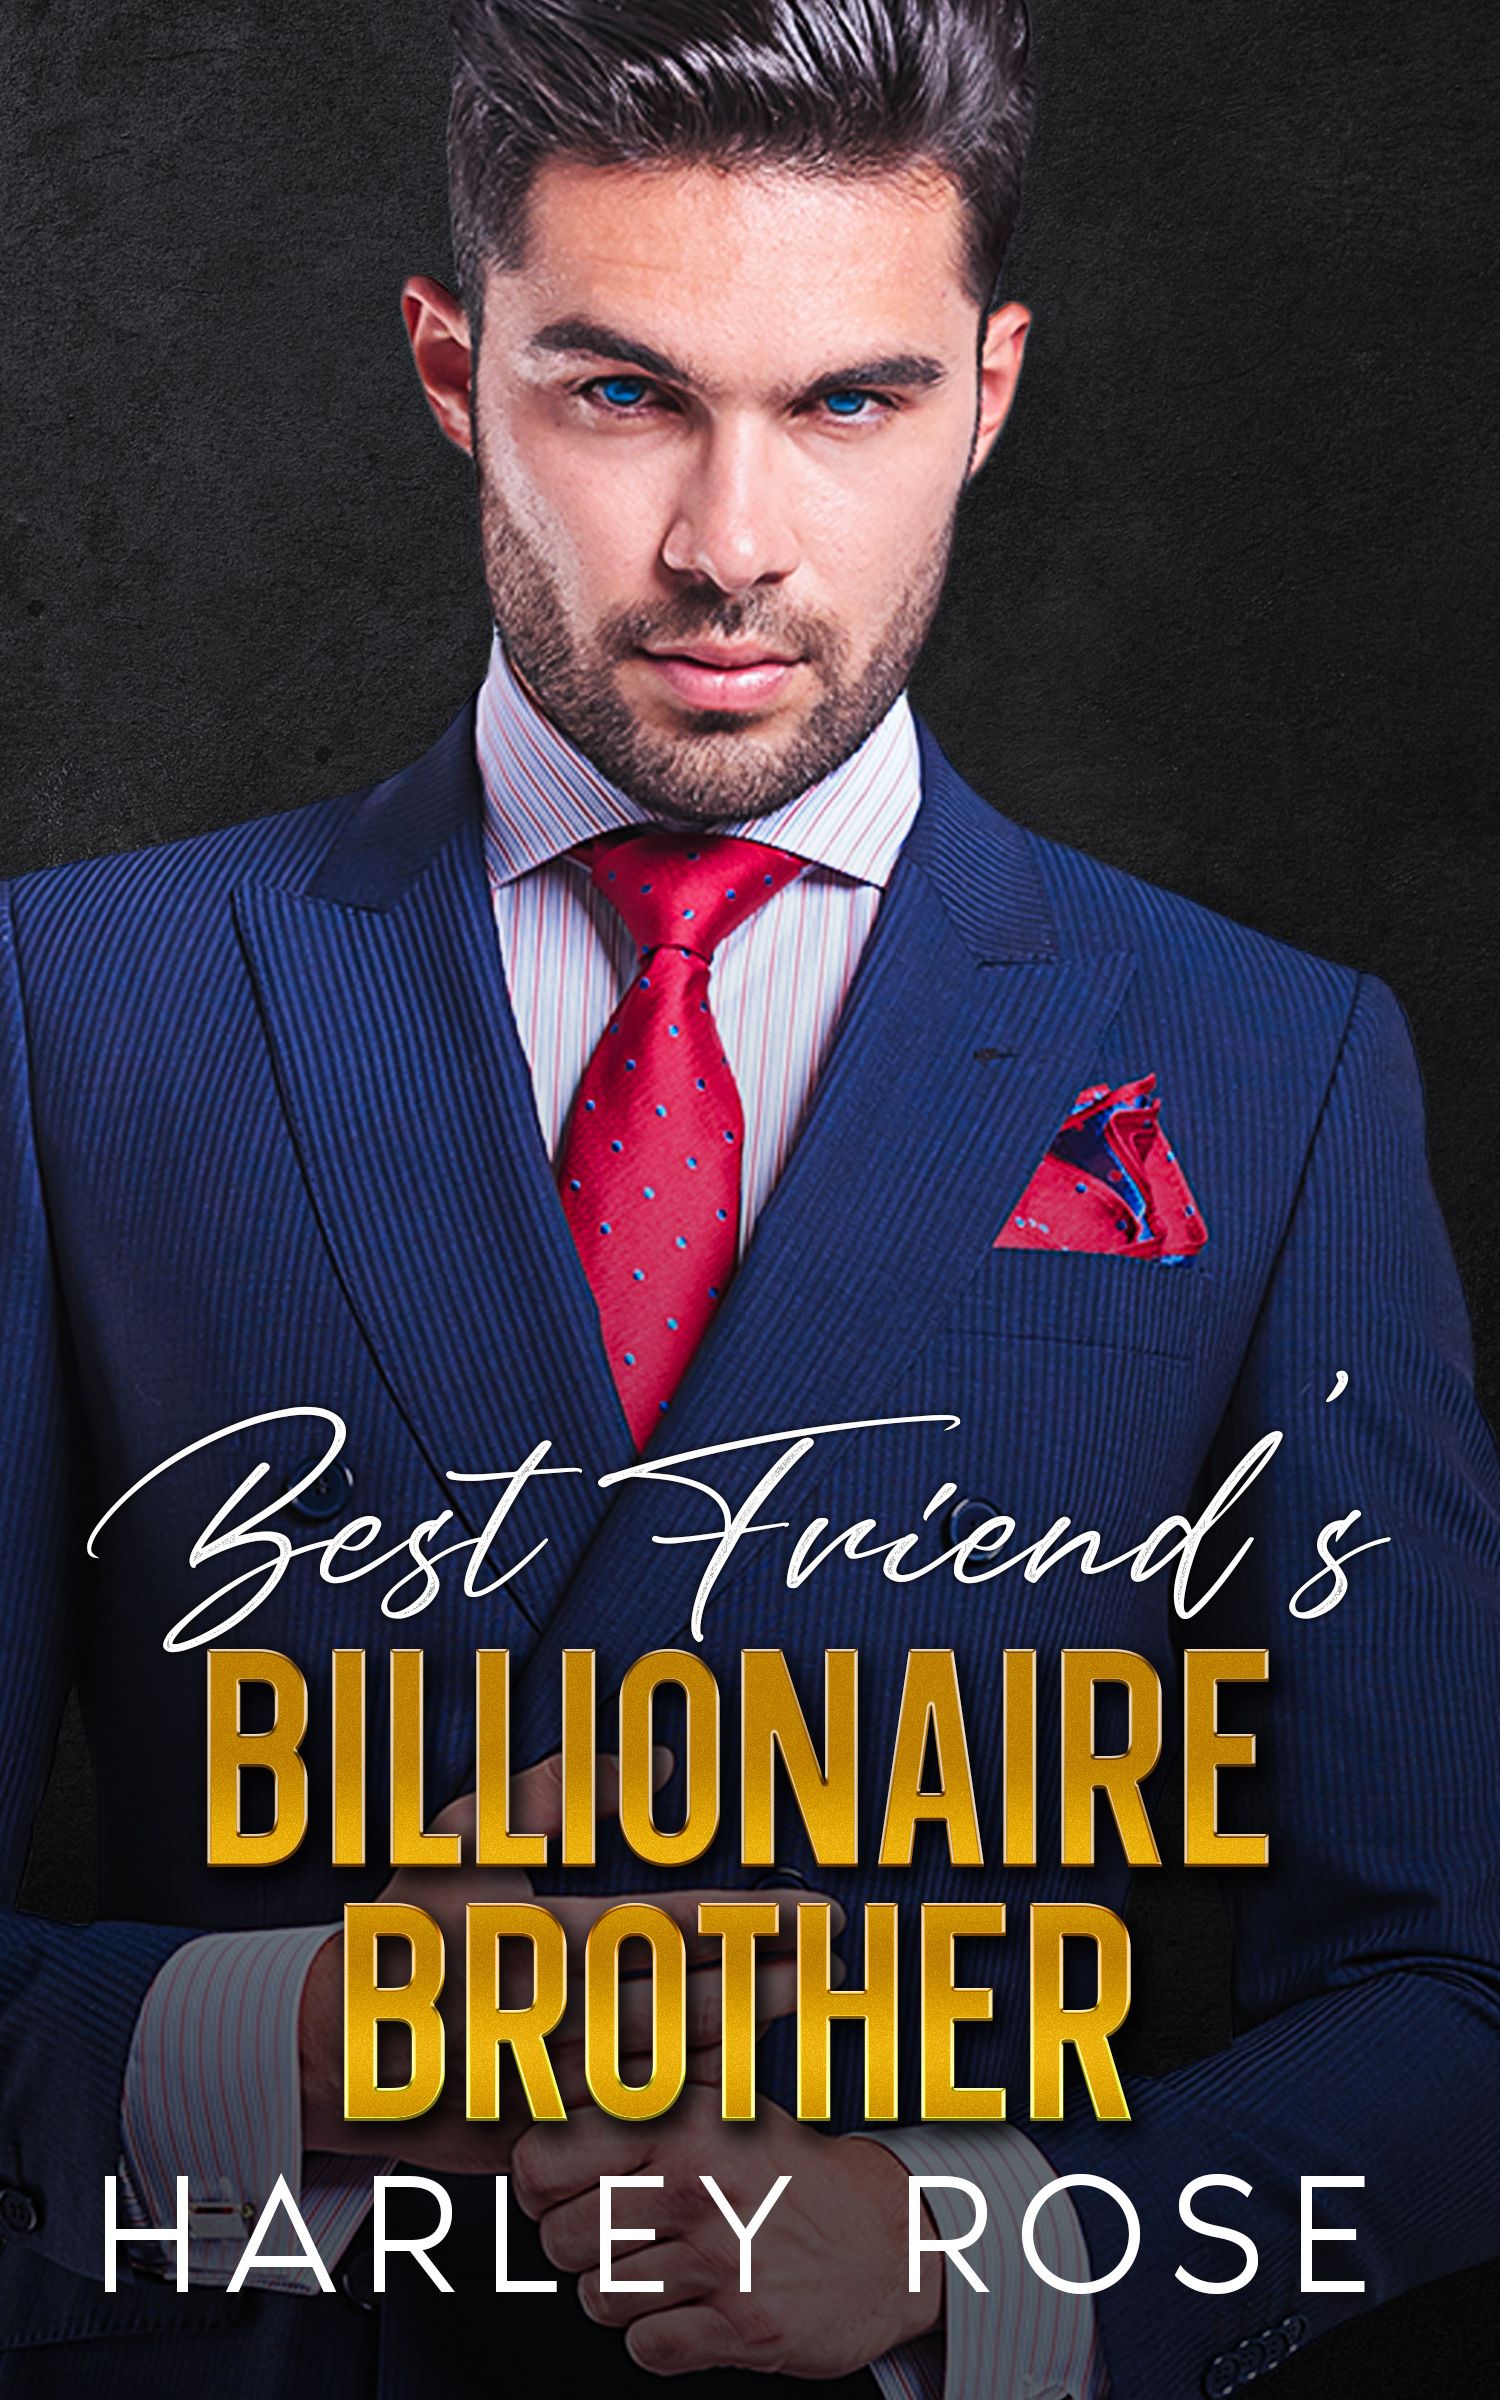 FREE: Best Friend’s Billionaire Brother by Harley Rose